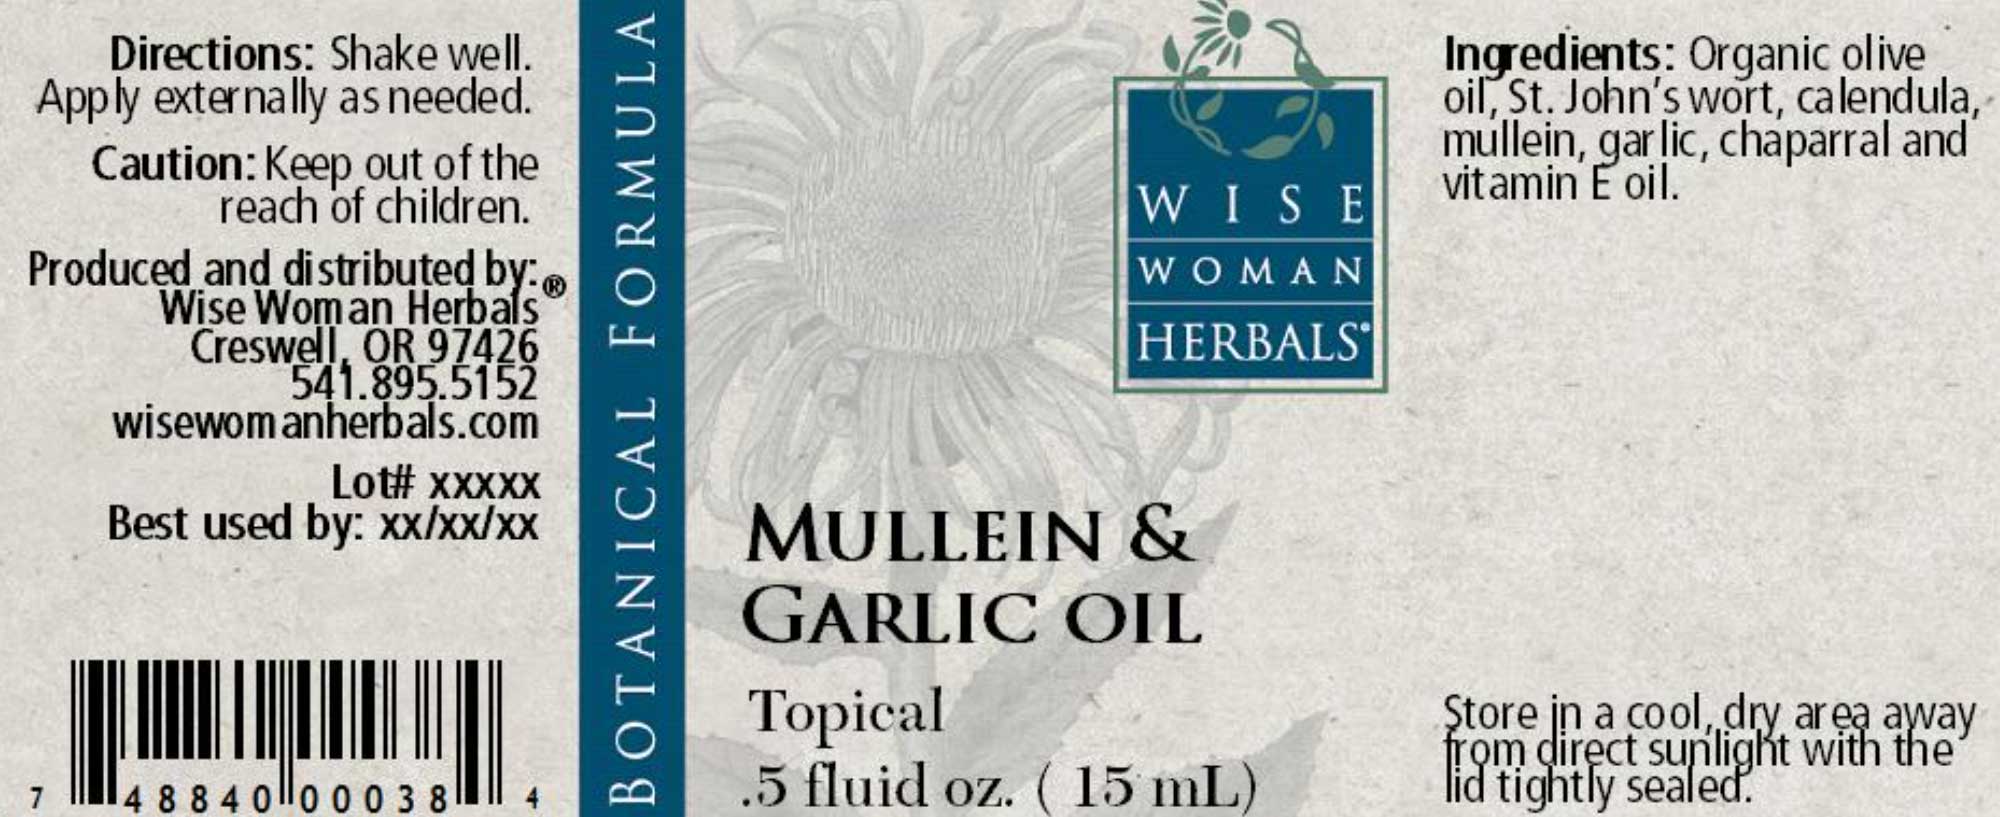 Wise Woman Herbals Mullein and Garlic Oil Label